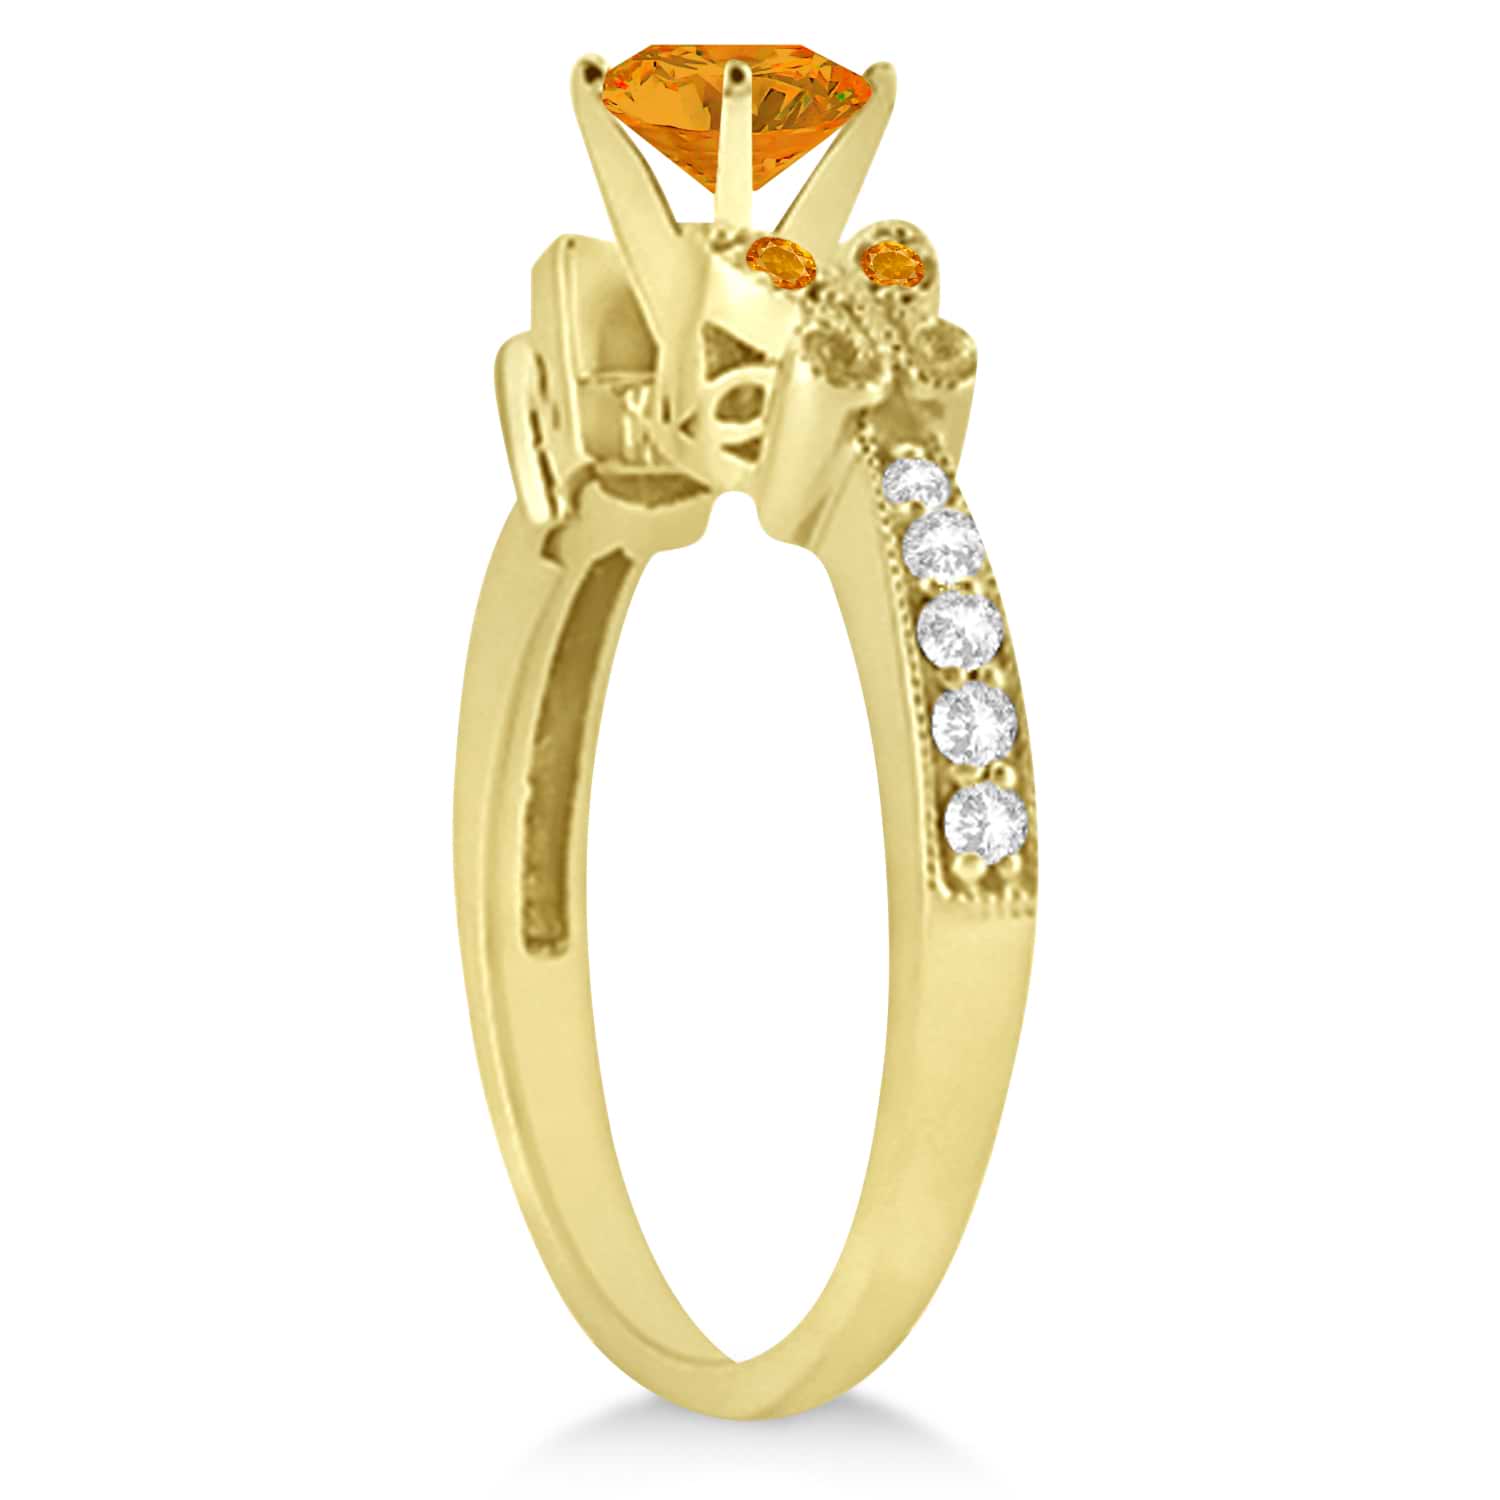 Butterfly Genuine Citrine & Diamond Engagement Ring 14K Yellow Gold 0.88ct